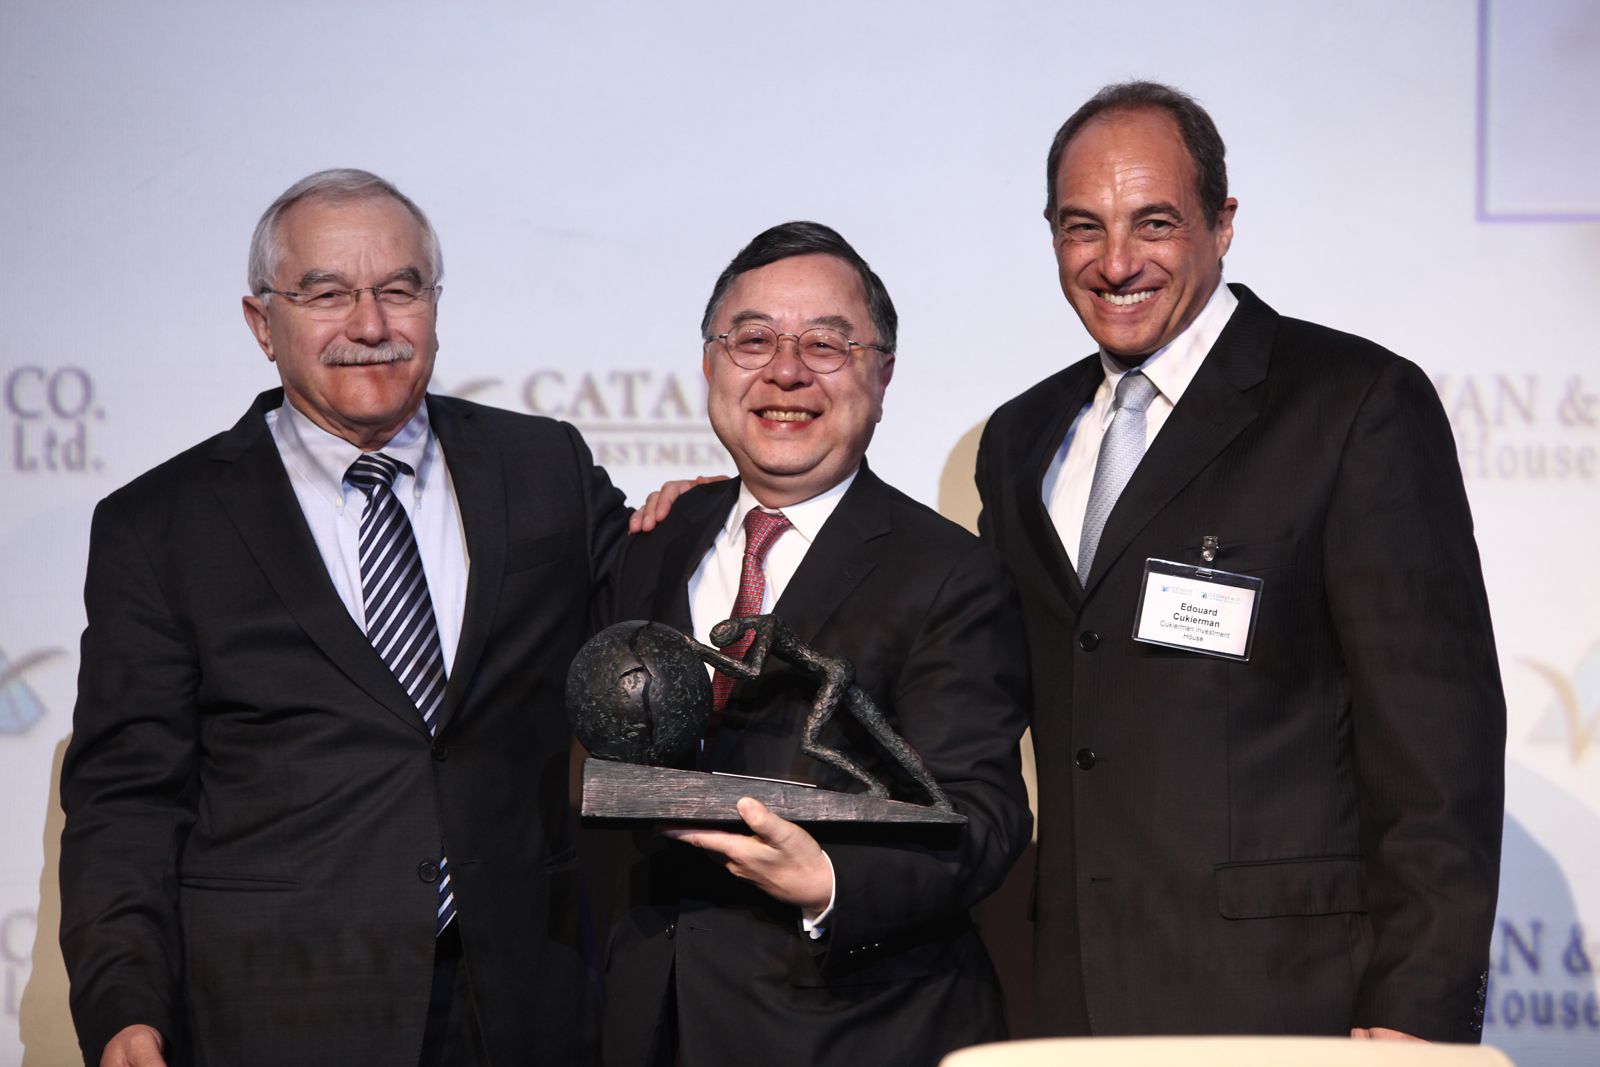 Yair Shamir (Managing Partner, Catalyst Fund), Ronnie Chan (Chairman of Hang Lung Properties) and Edouard Cukierman (Chairman of Cukierman Investment House and Managing Partner of Catalyst CEL). Photo courtesy